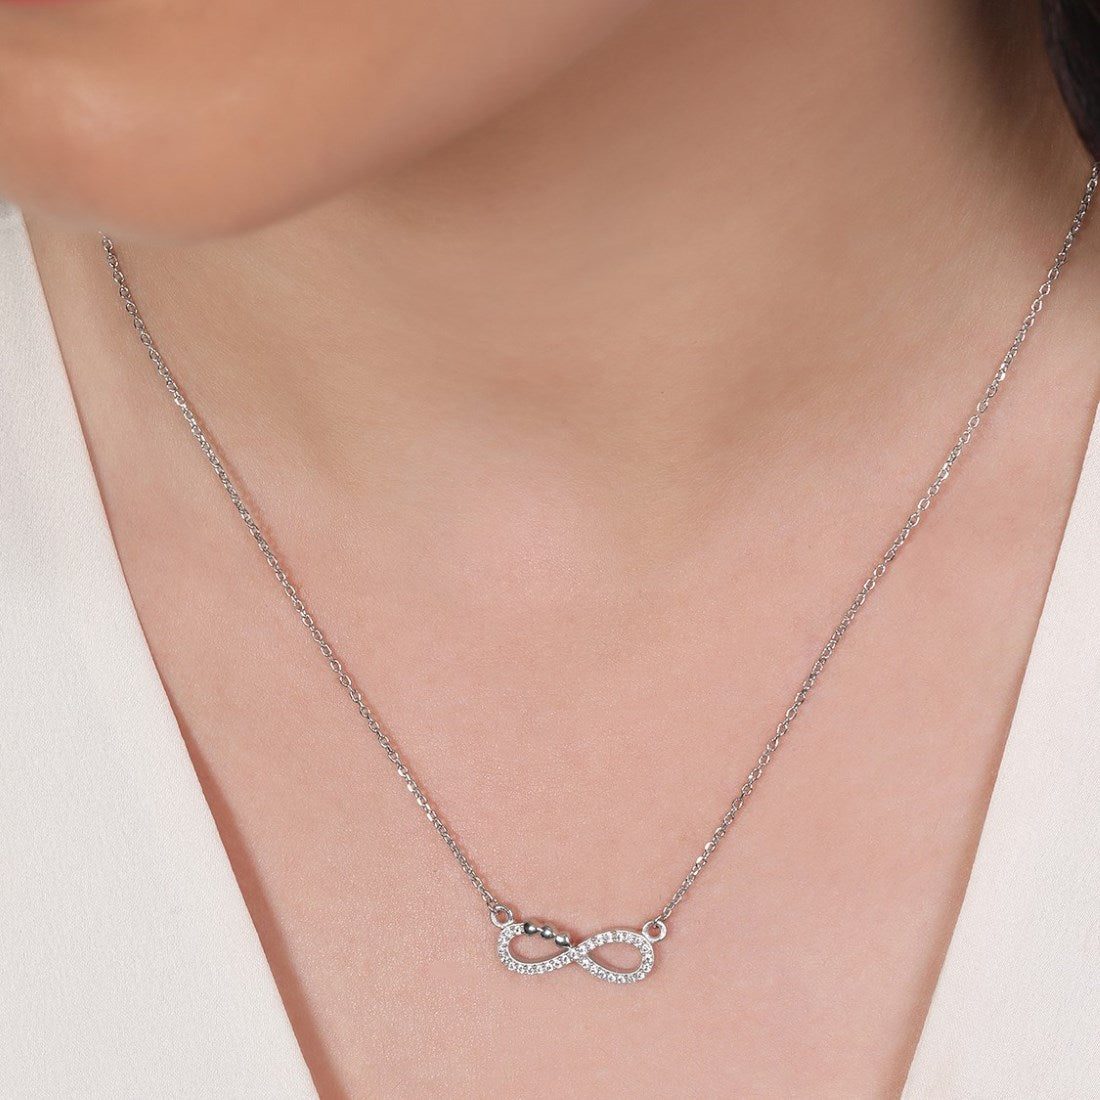 Eternal Radiance Rhodium-Plated 925 Sterling Silver Necklace